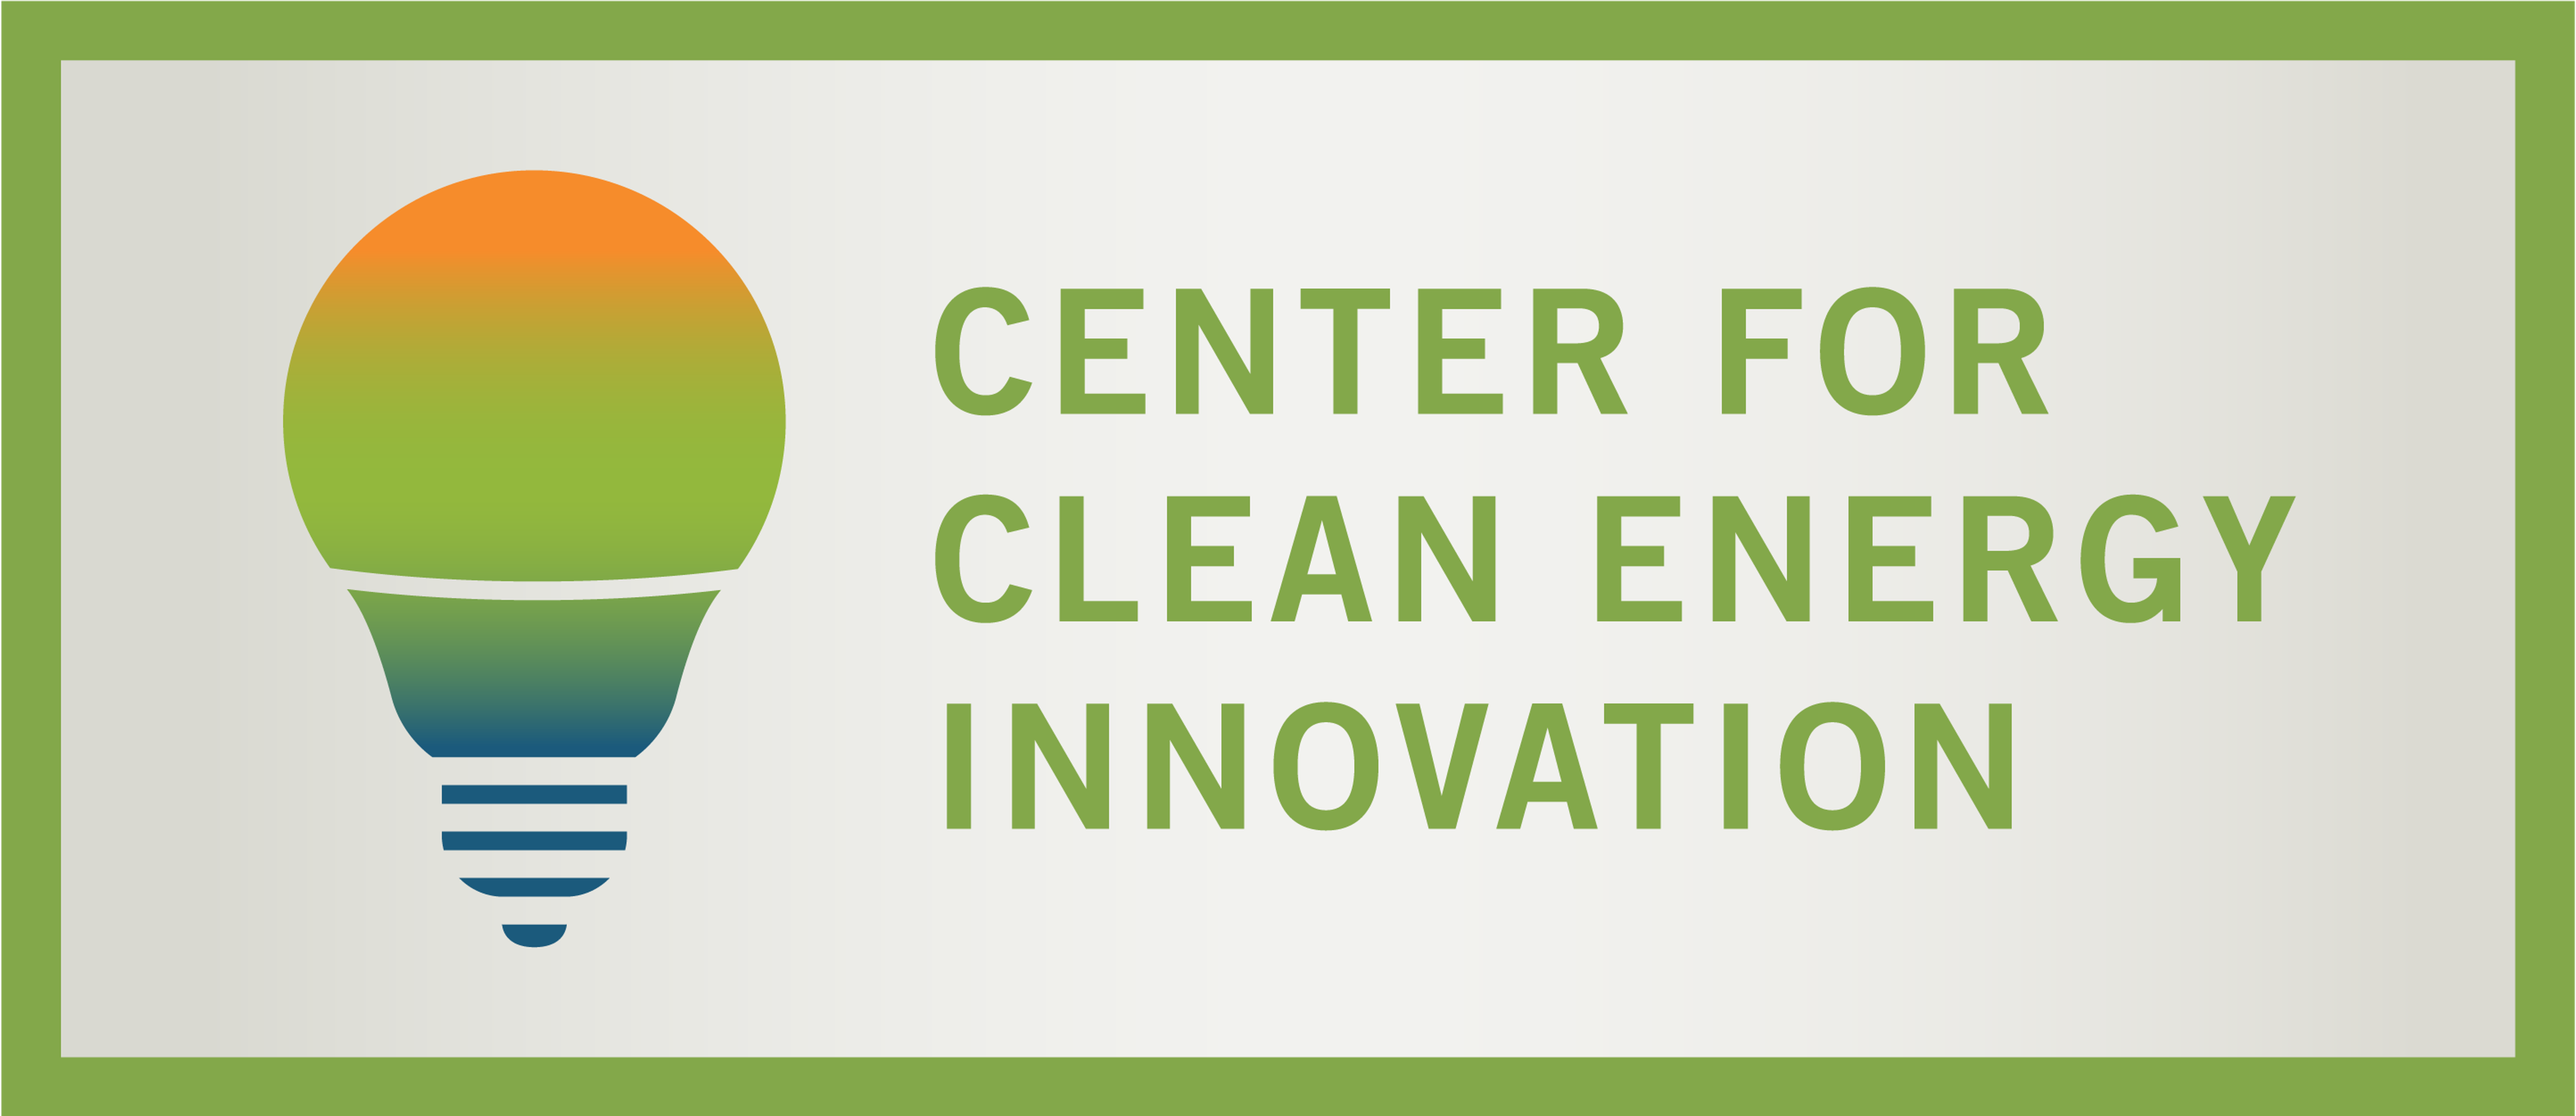 Comments to the DOE Office of Clean Energy Demonstration Regarding Demand-Side Support for Clean Energy Technologies